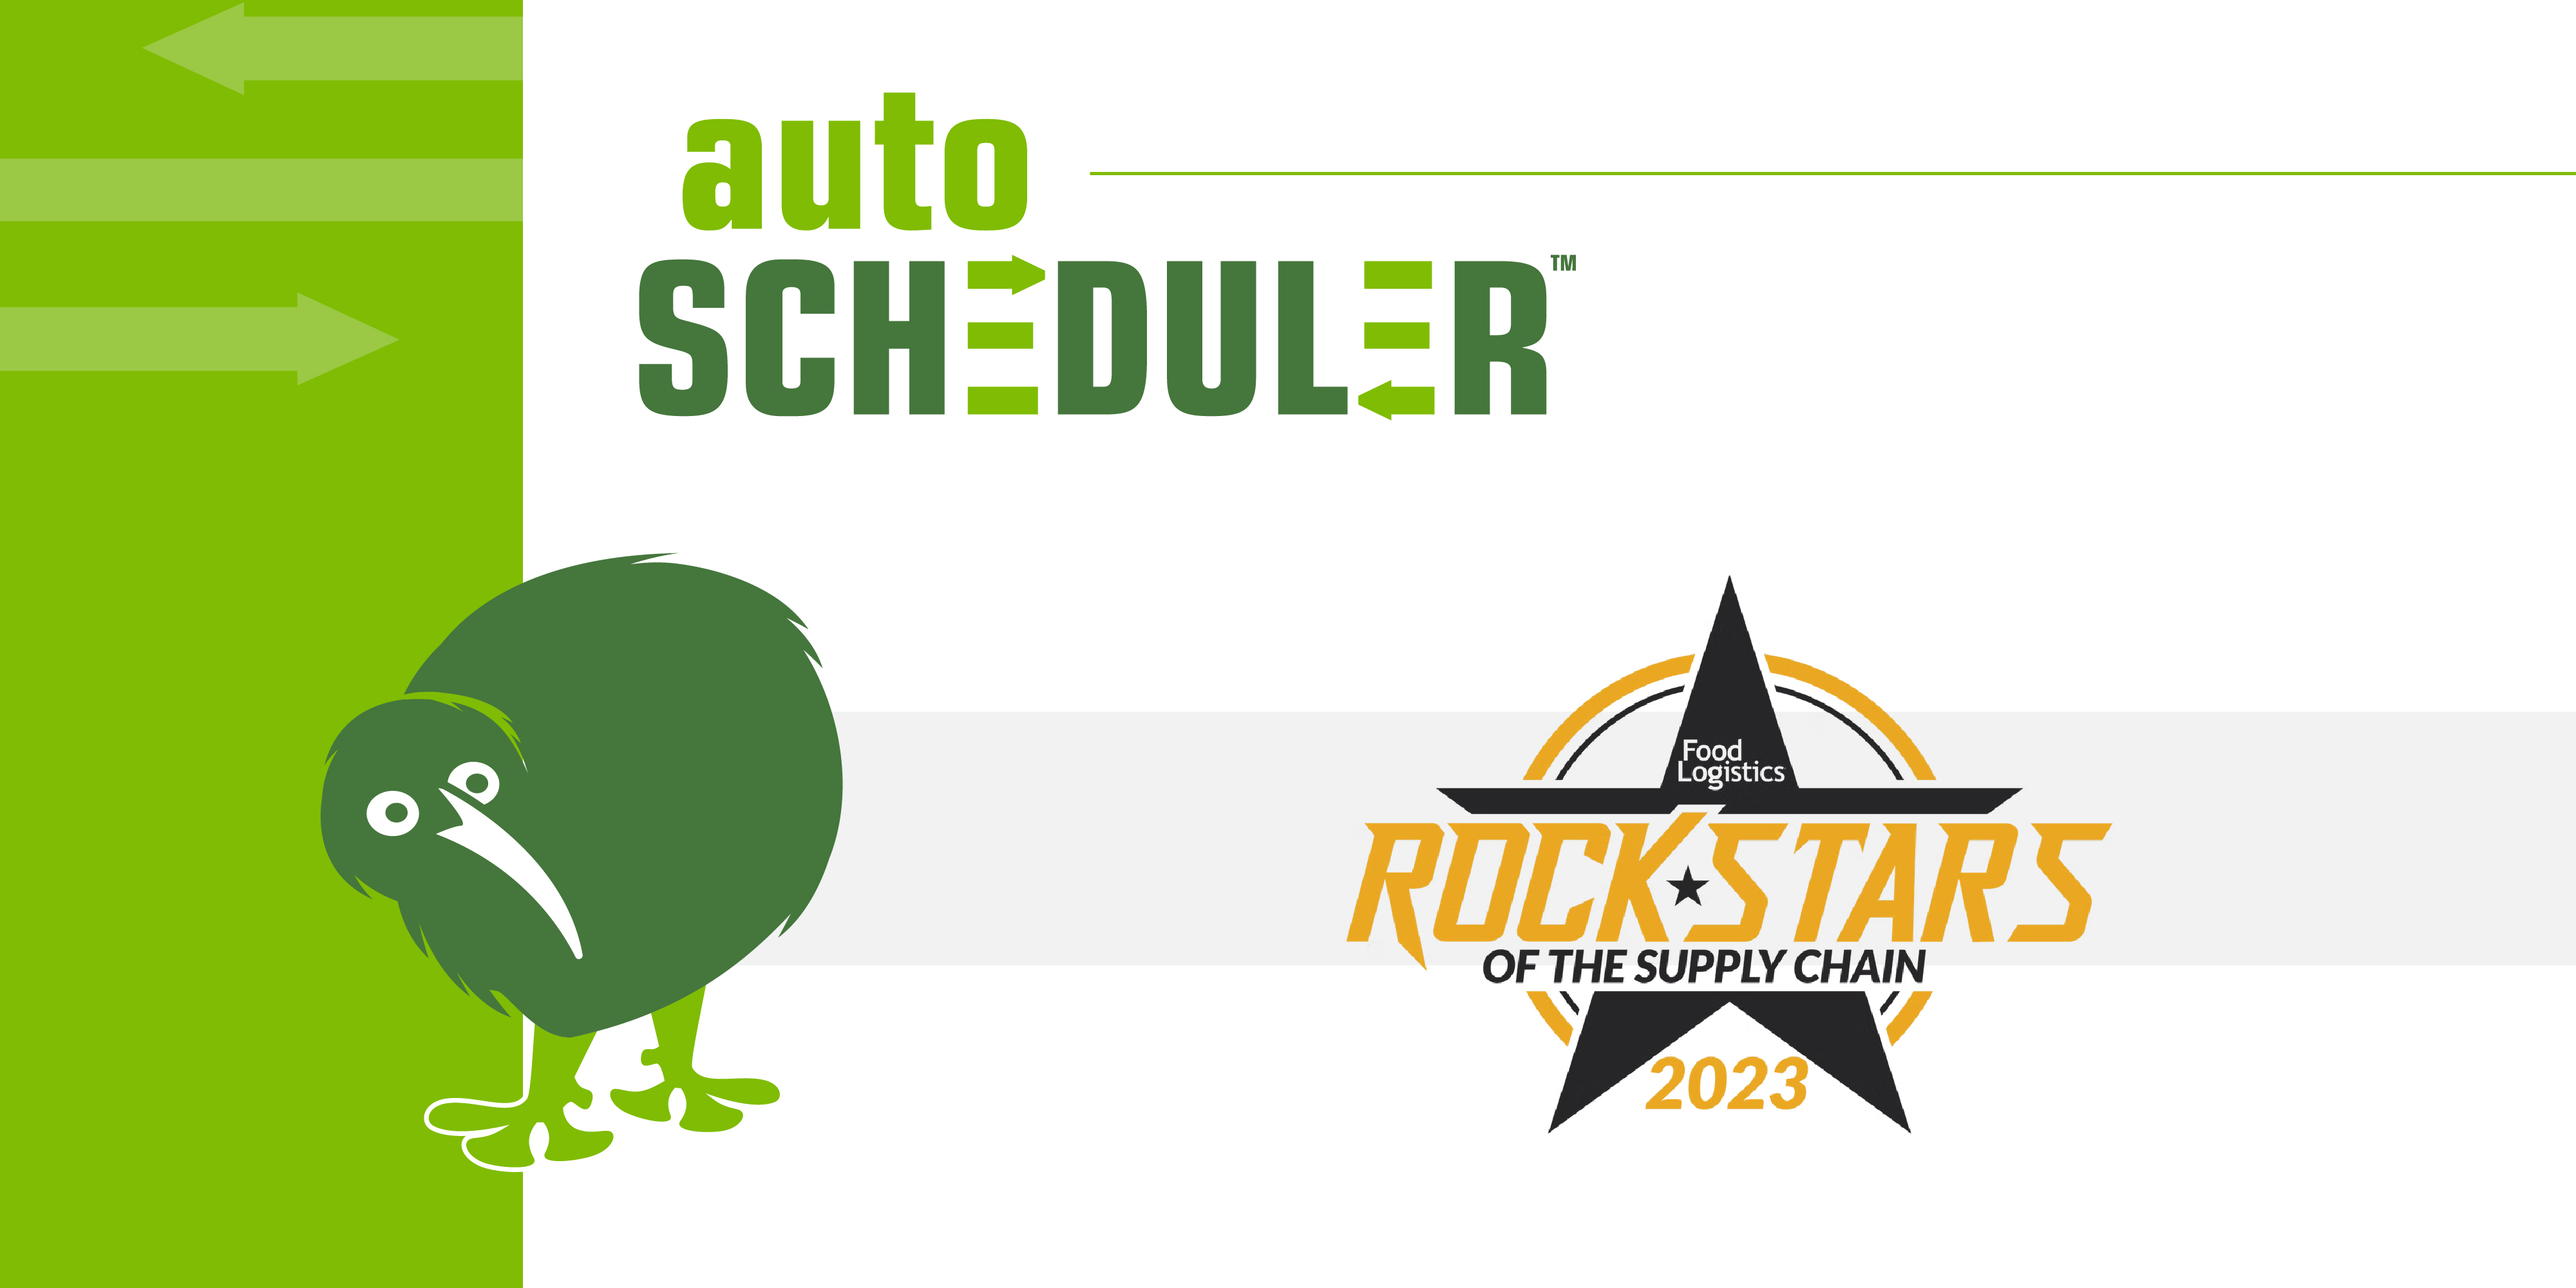 AutoScheduler CEO Keith Moore Named Recipient of Food Logistics 2023 Rock Stars of the Supply Chain Award